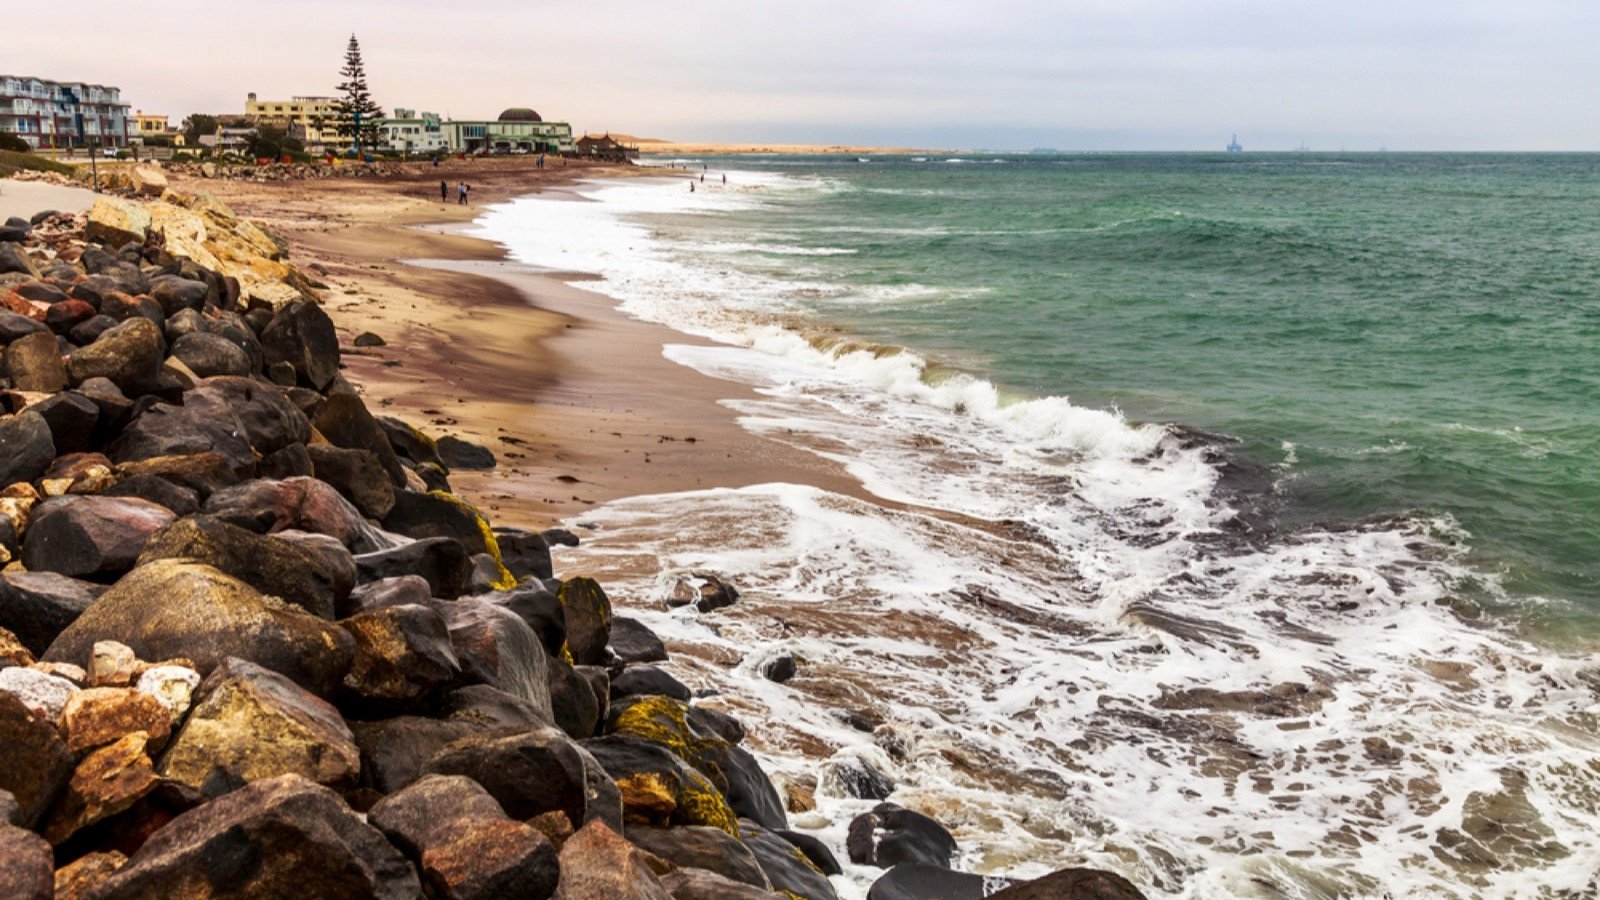 <p>For this exciting sea-themed adventure, head to Swakopmund, Namibia, and enjoy the beautiful coastline. You’ll also enjoy quality time with its healthy, thriving seal population. You may get up close to the seals in a kayak.</p><p>If you’re lucky, you might also see dolphins, whales, the odd pelican, and many sea birds on this kayak safari.</p>